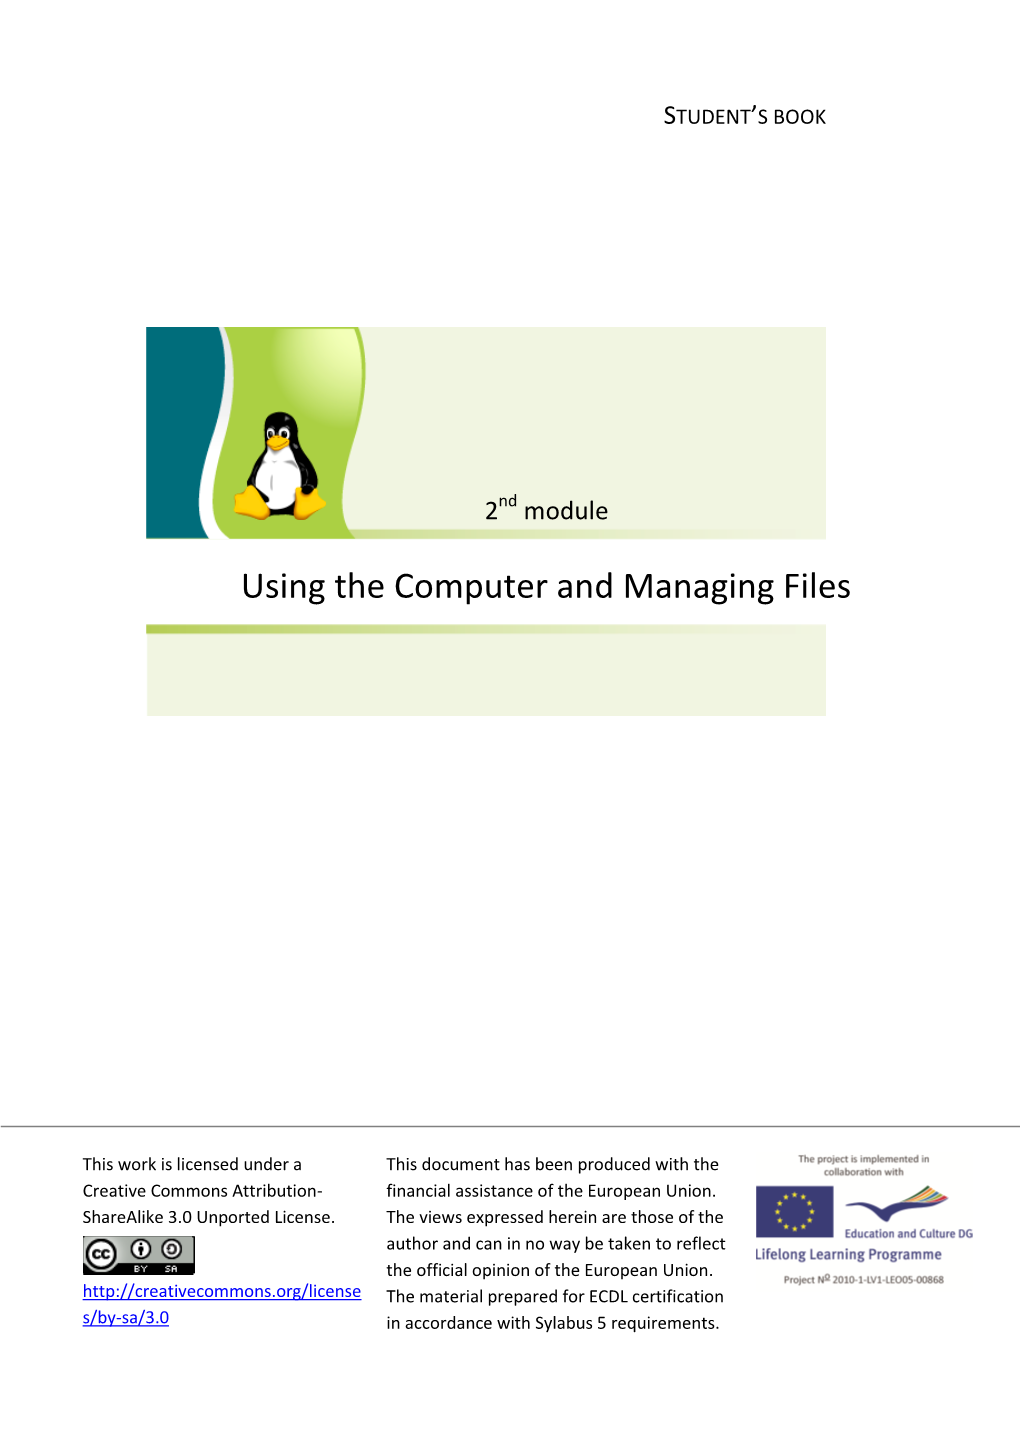 Using the Computer and Managing Files